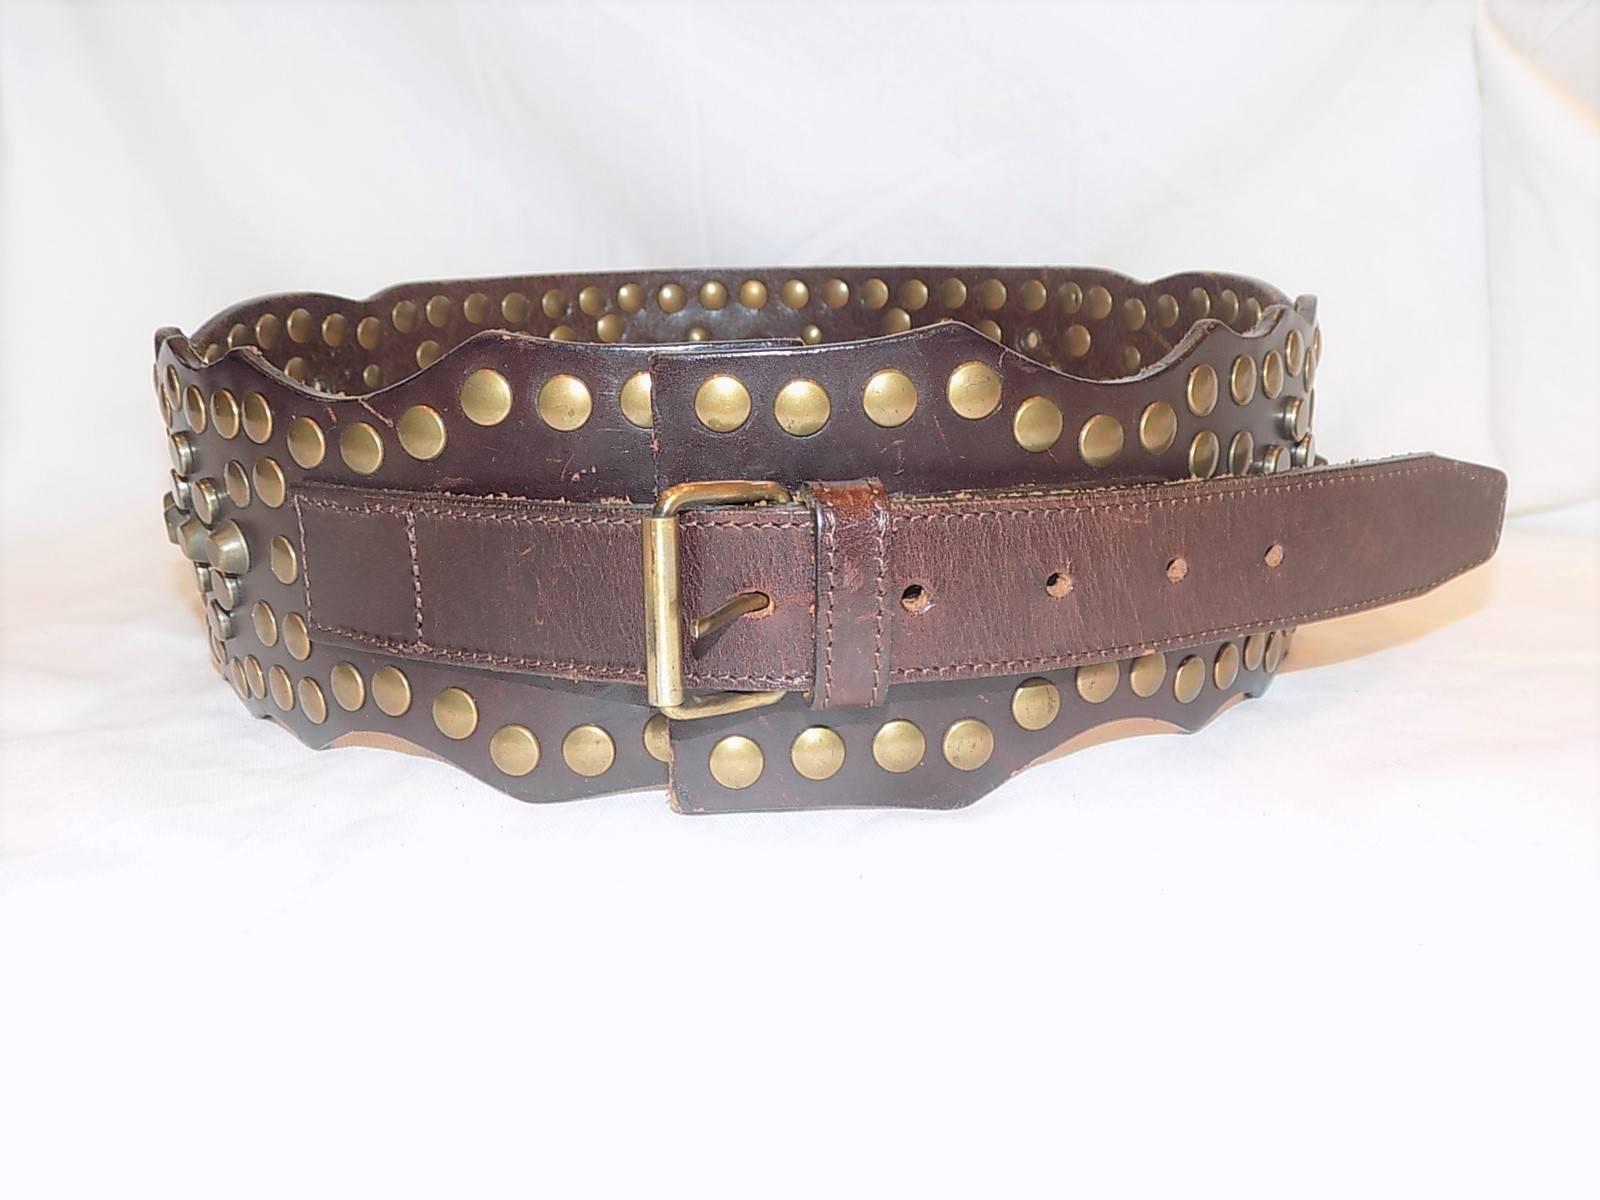 Obsessed with fabulous belts. This is a must have Dolce & Gabbana heavy metal studded wide leather belt/  Brass and silver grommets and studs on a thick brown leather, Just Fabulous! From 28